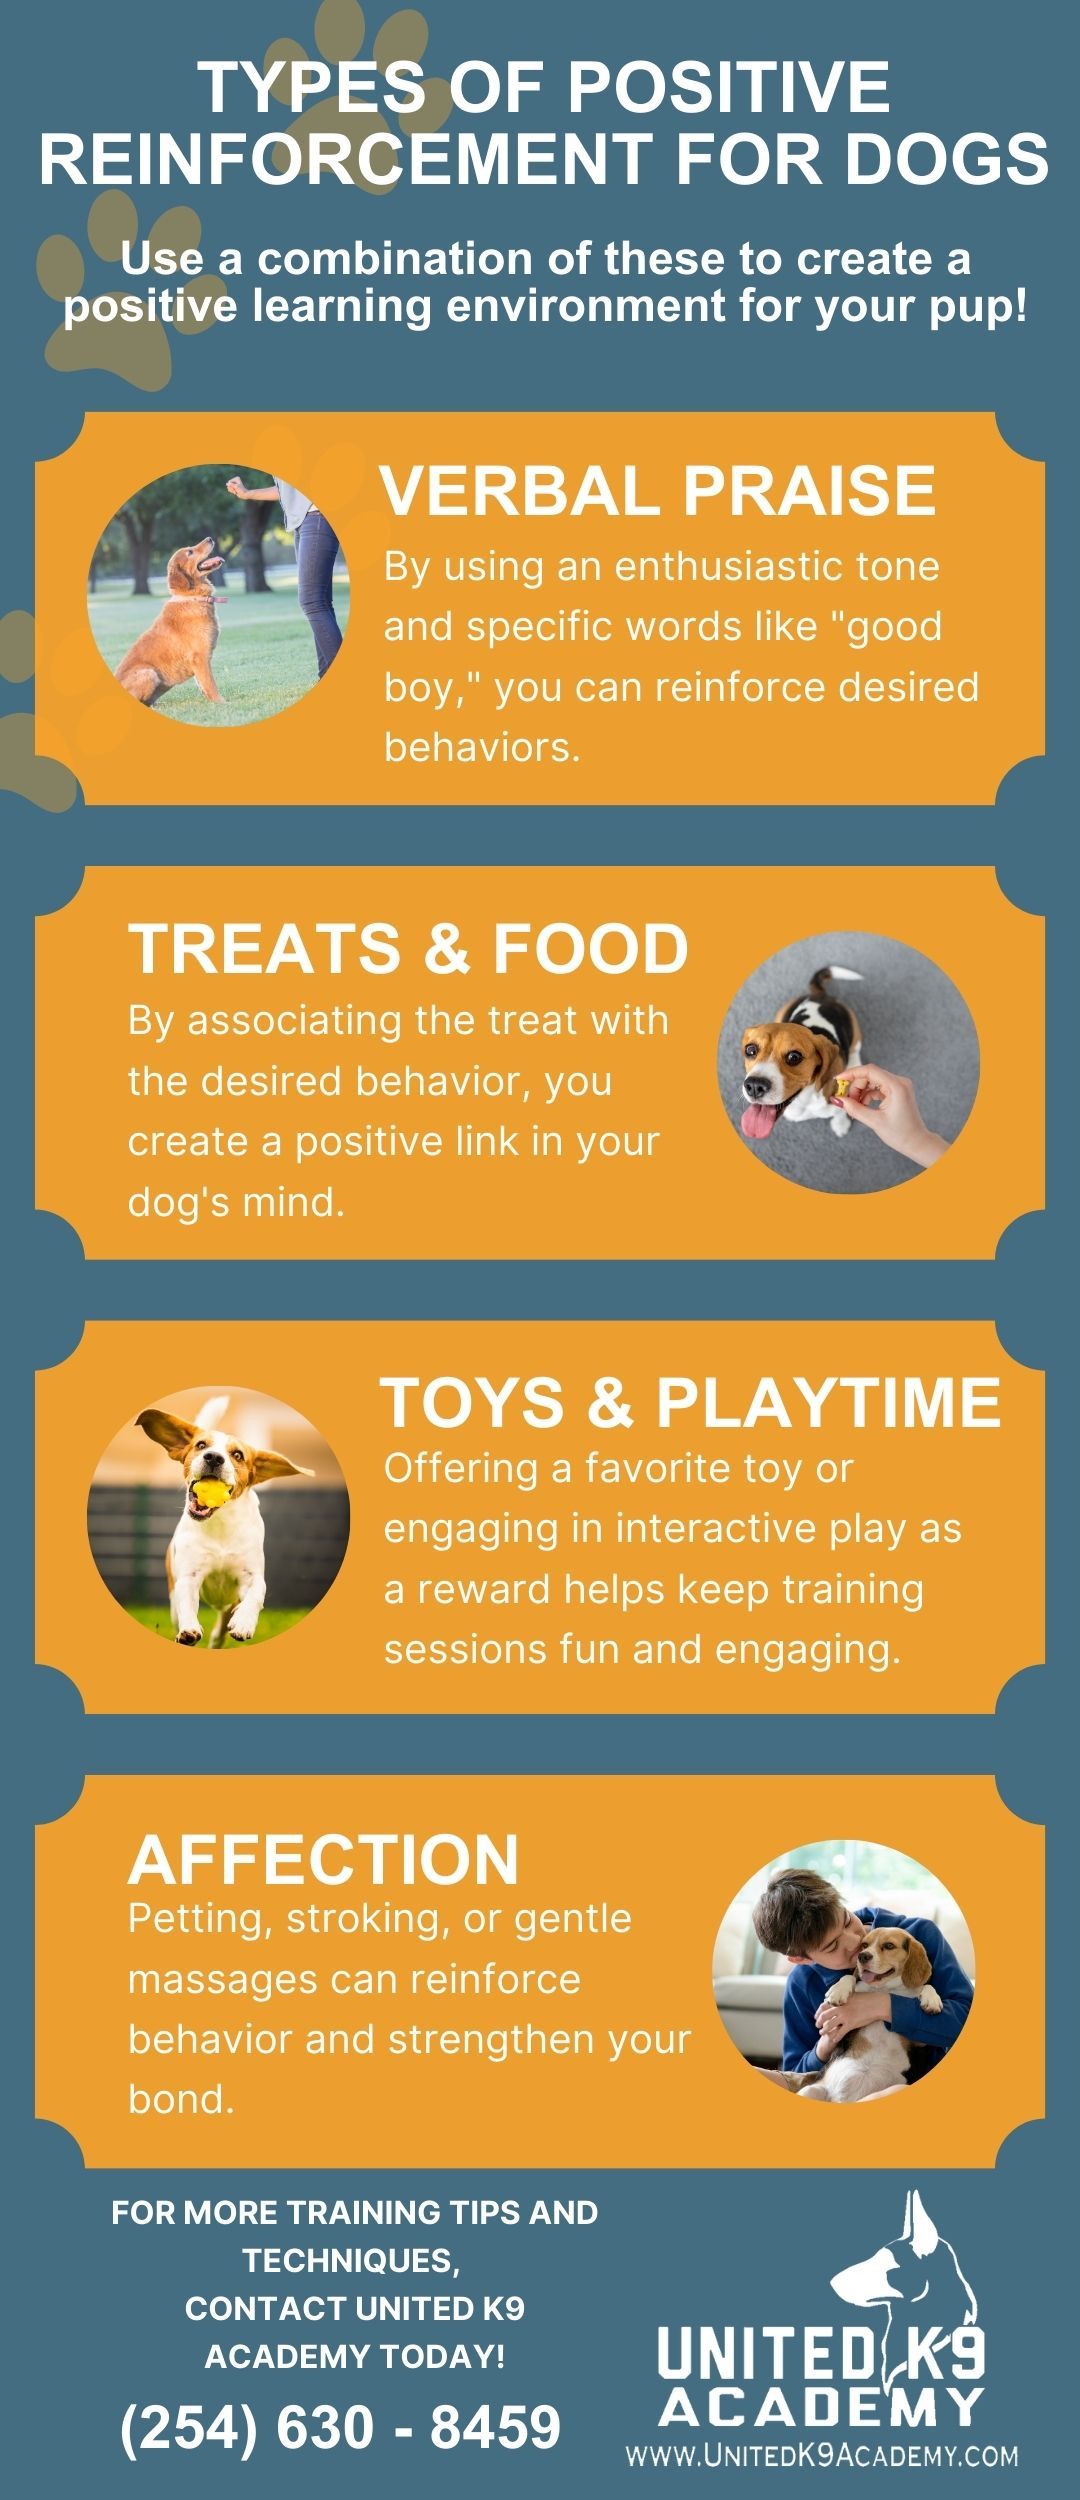 M37810 - United K9 Academy - Types Of Positive Reinforcement For Dogs.jpg